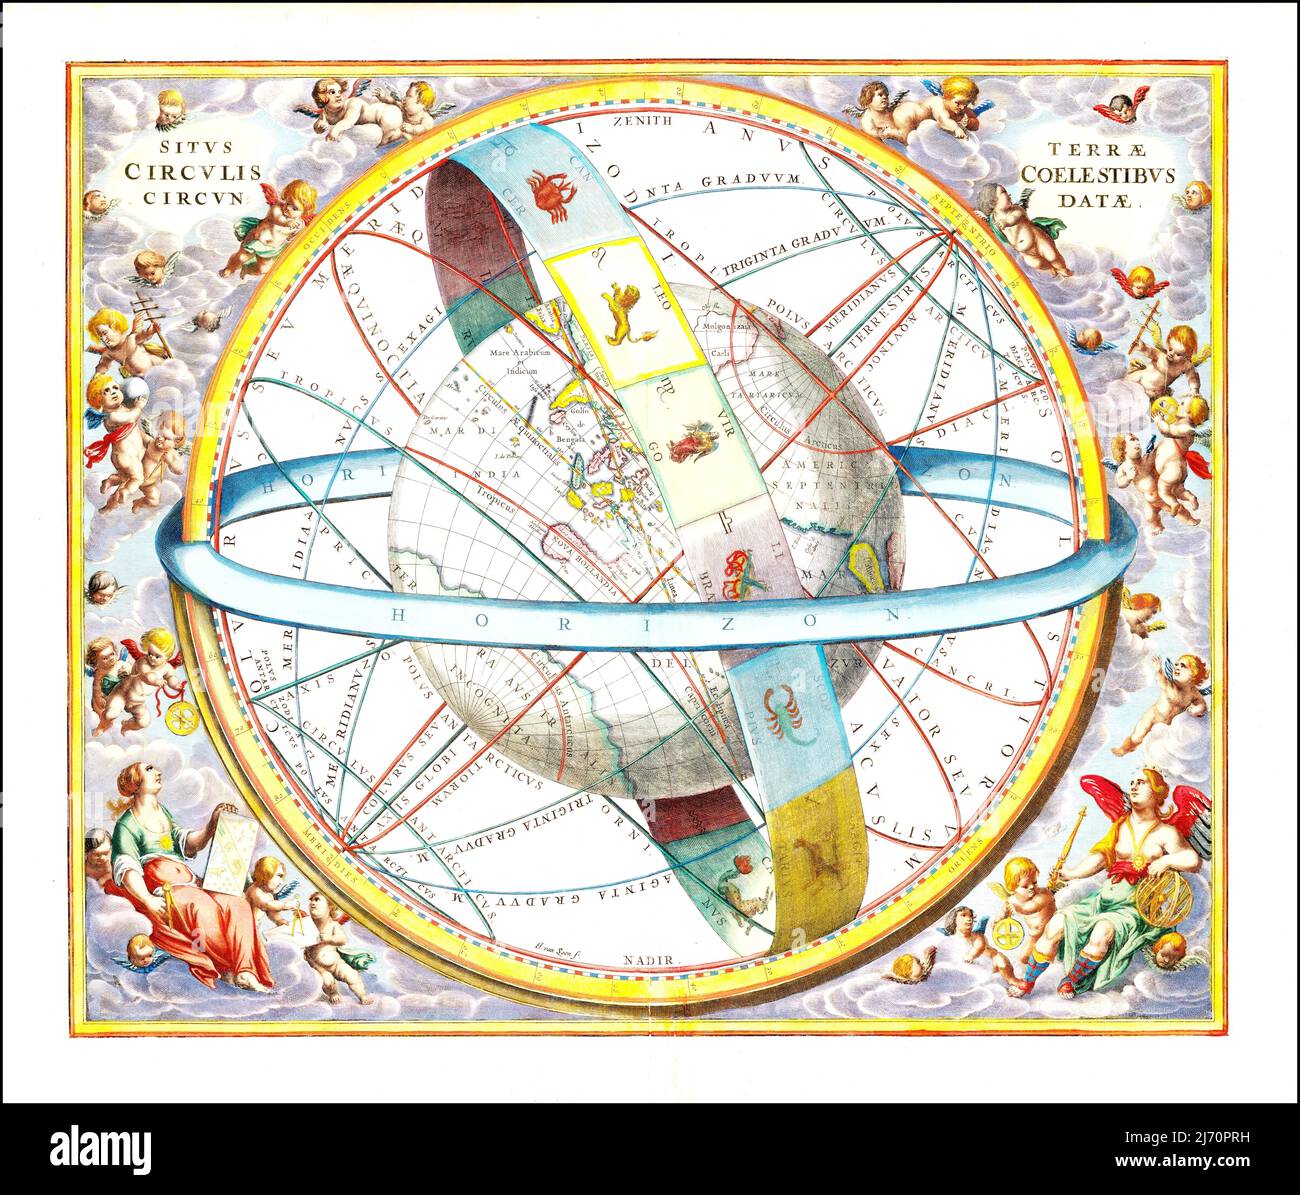 Andreas Cellarius - Location of the Earth Encircled by the Celestial Circles - 1660 Stock Photo